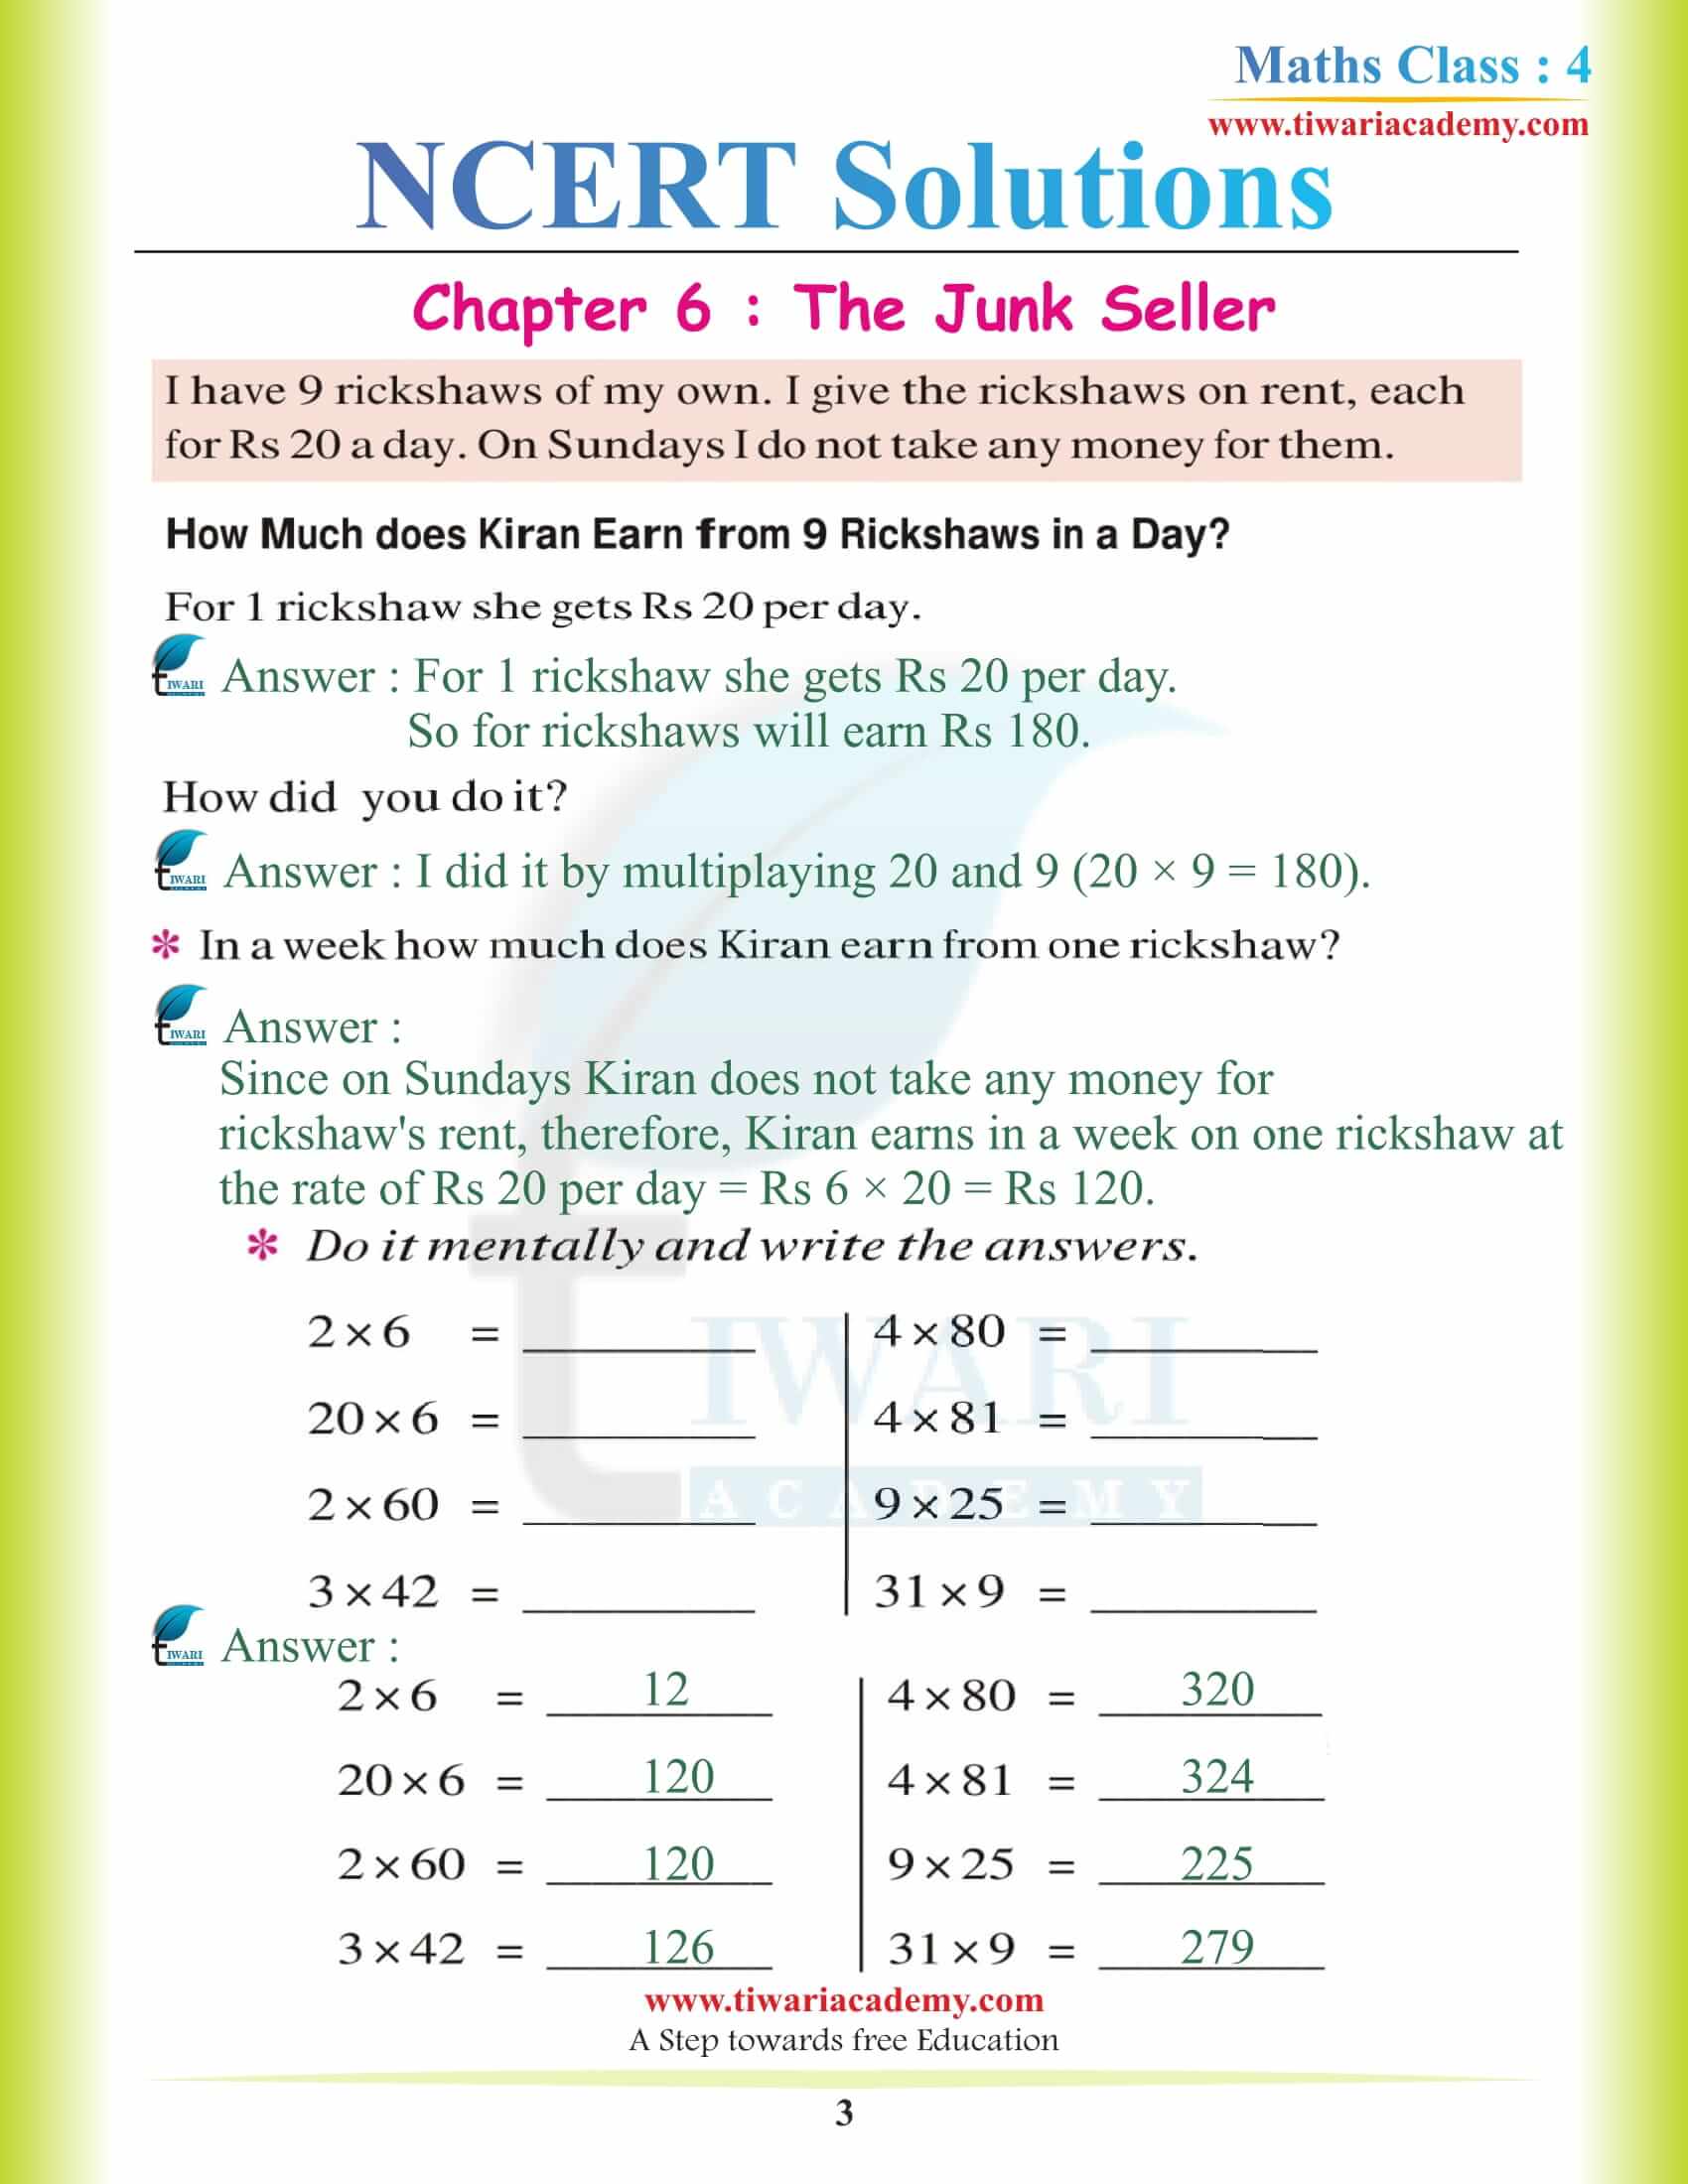 NCERT Solutions for Class 4 Maths Chapter 6 in PDF